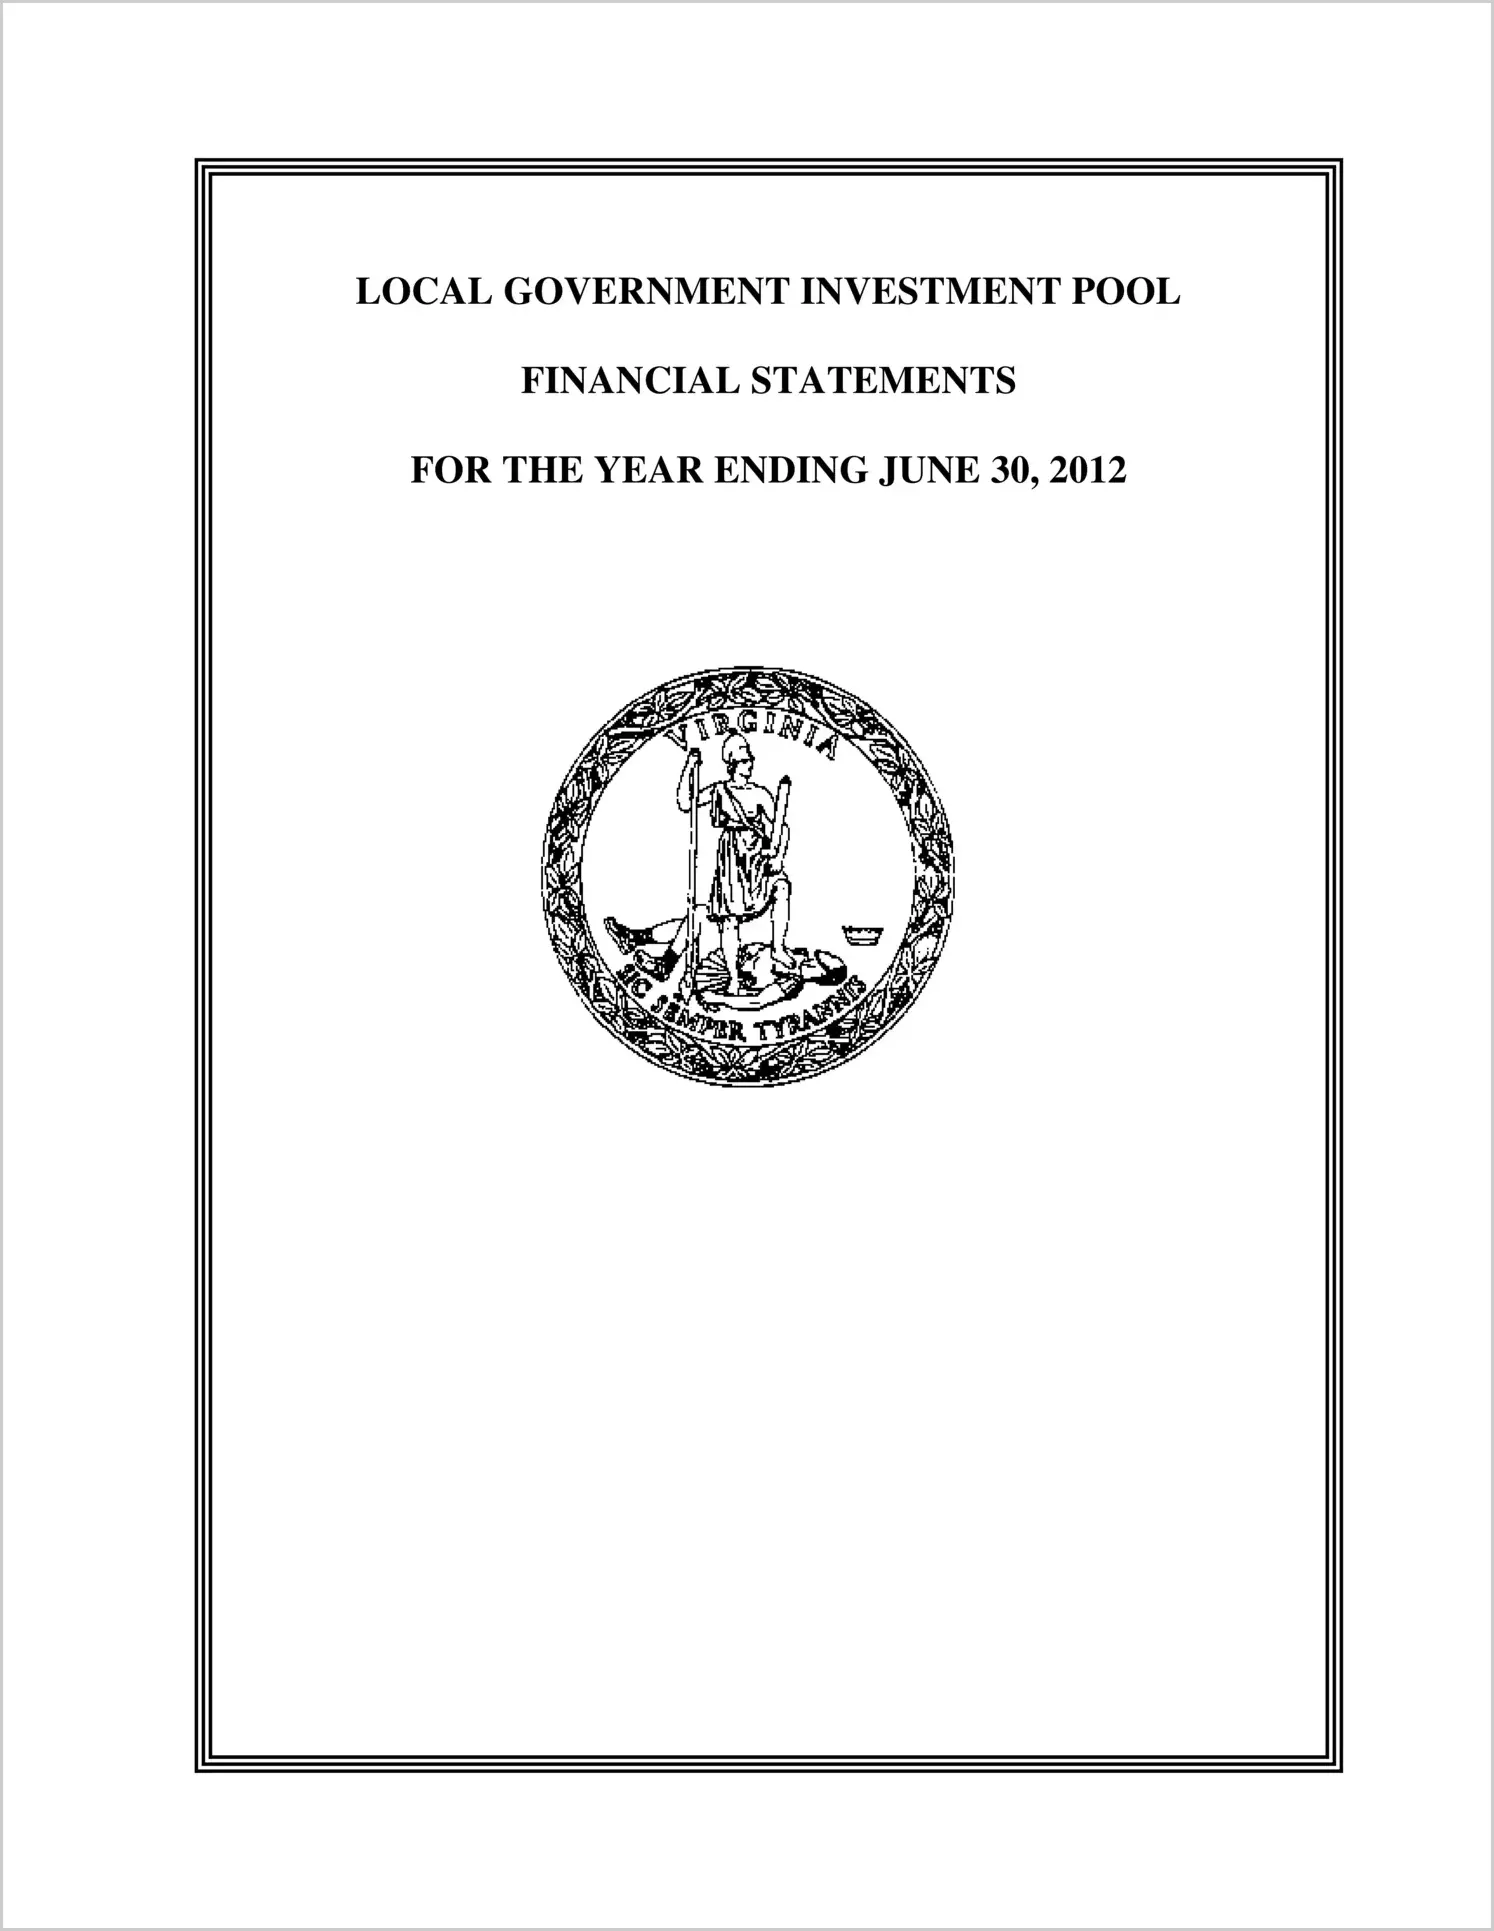 Local Government Investment Pool Financial Statements for the year ended June 30, 2012